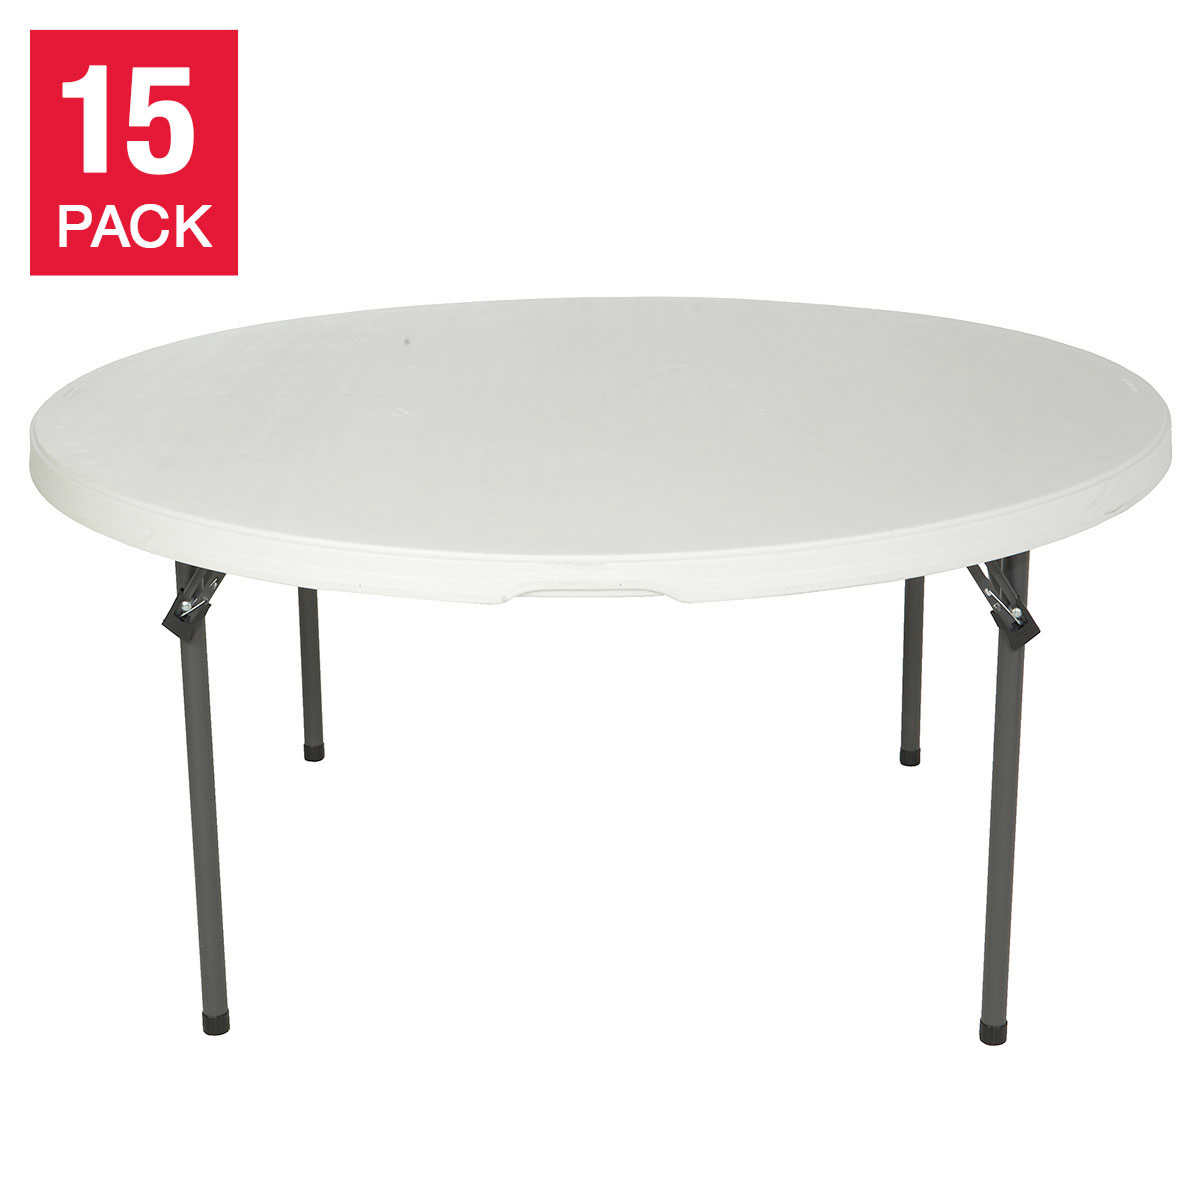 Lifetime 60 Round Table White Or Beige